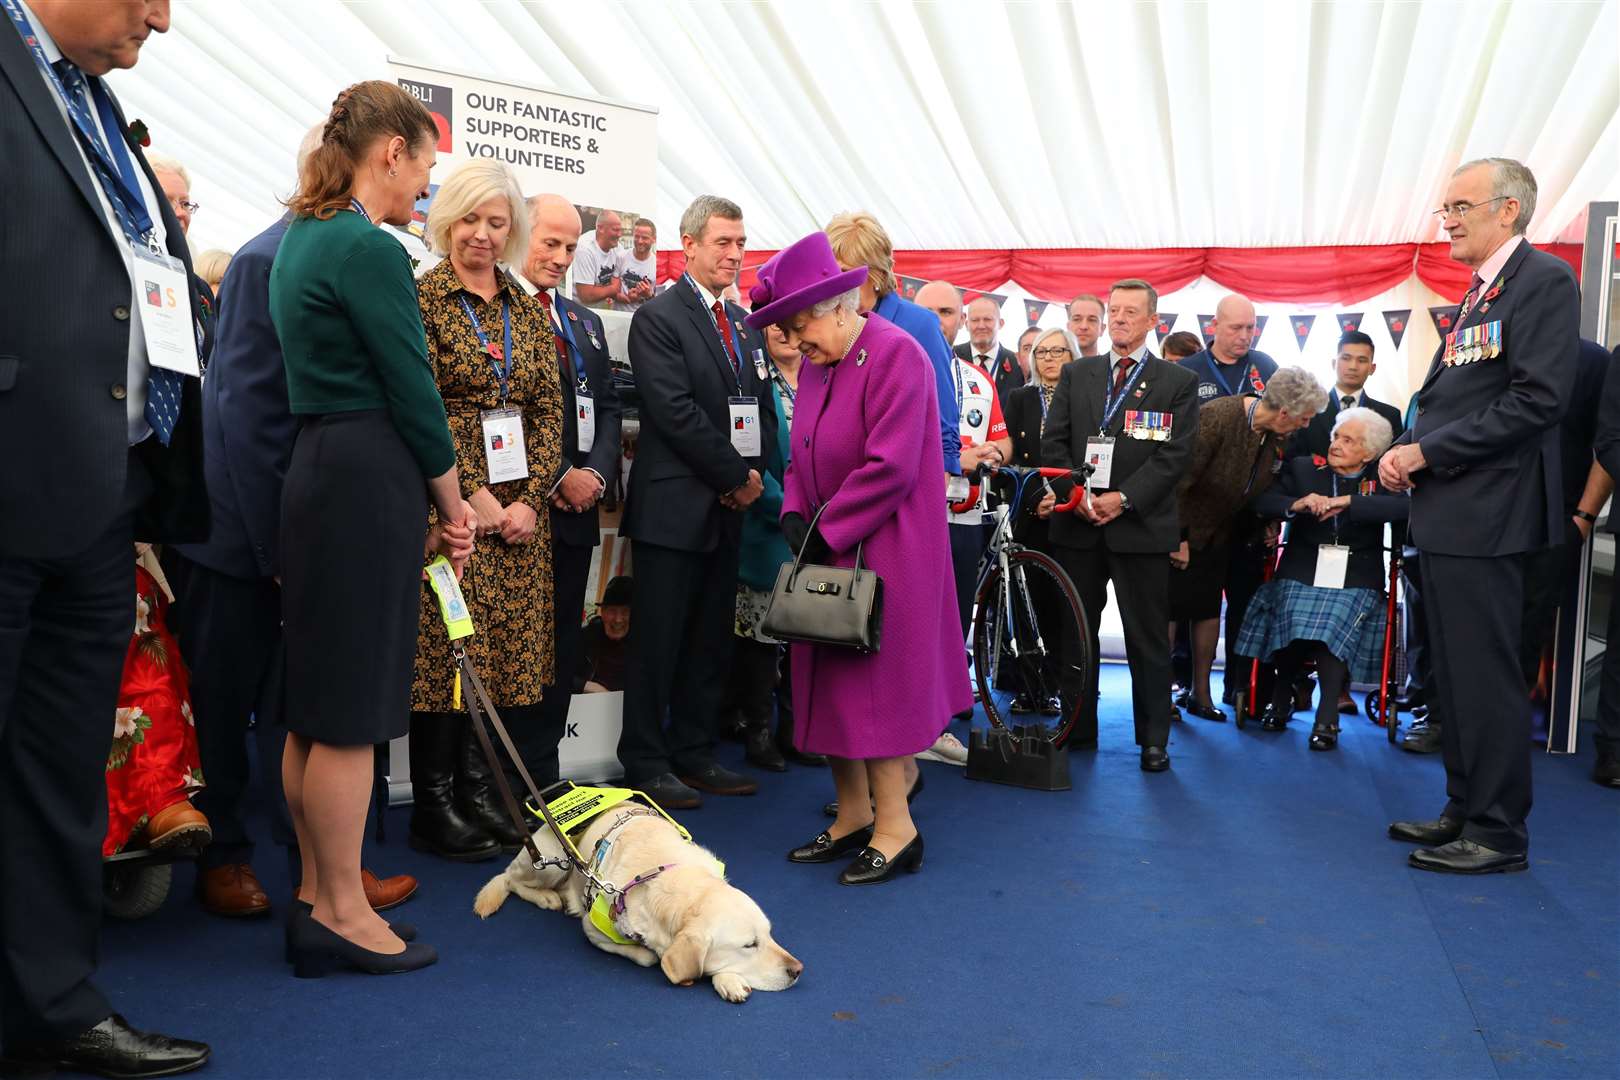 The Queen seemed very pleased to see a dog at the village